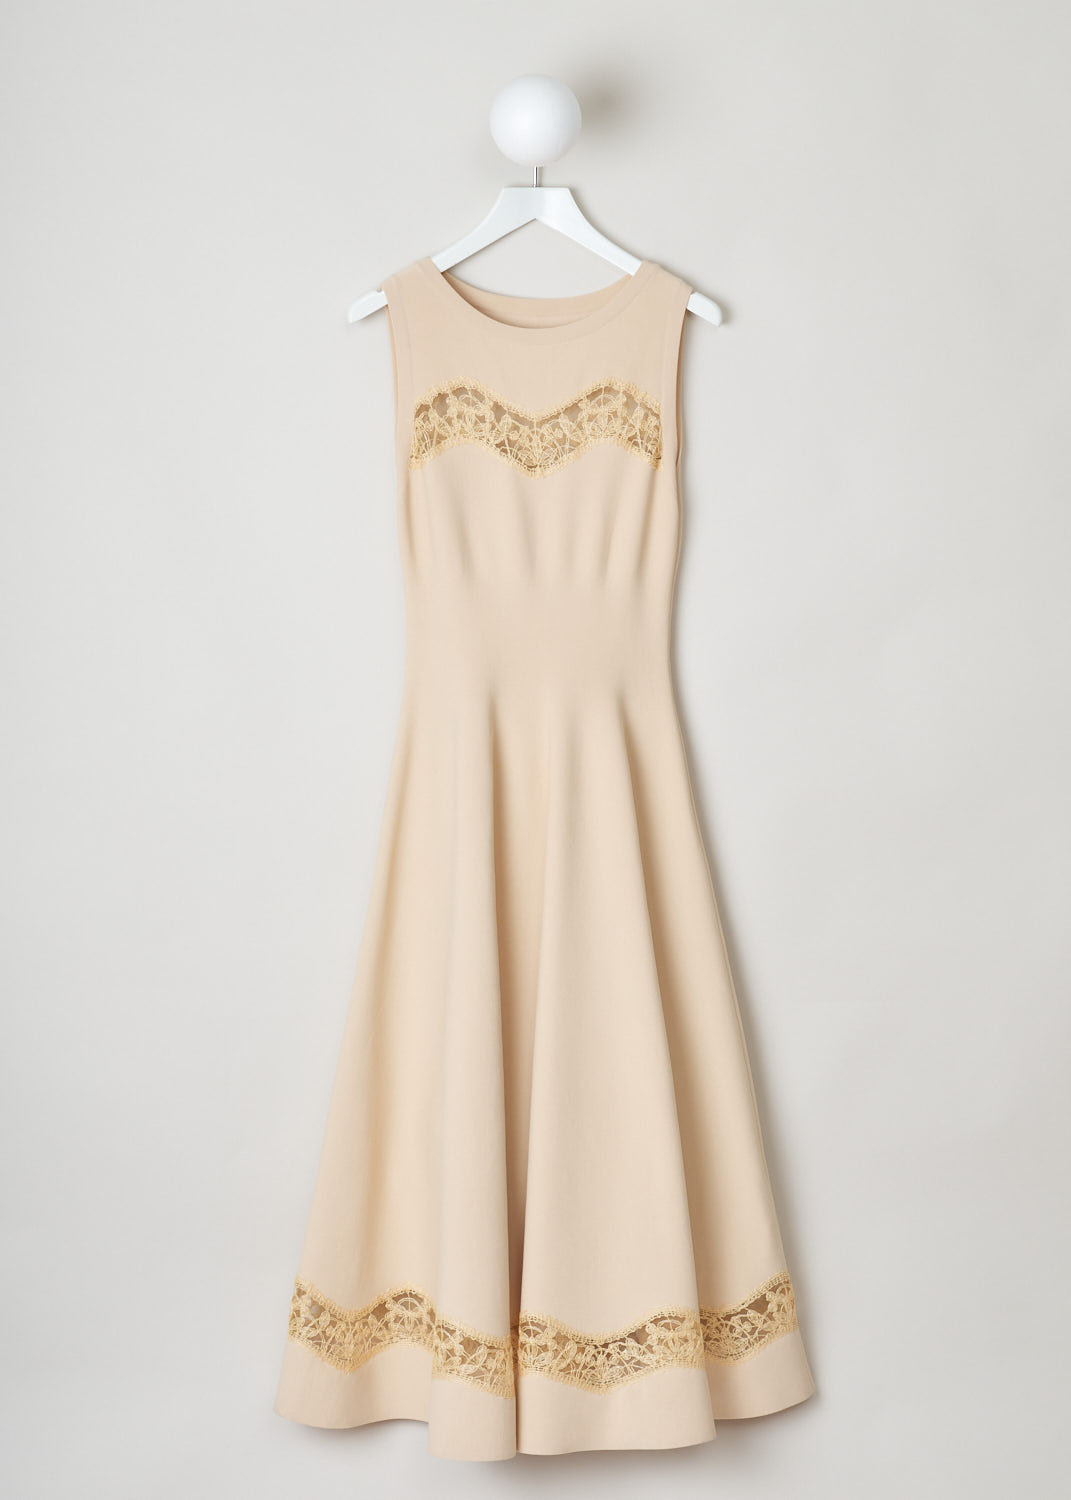 AlaÃ¯a, Max length dress with embroidered detailing, 9E9RM34LM473_robe_SM_raphia_dentelle_C120, beige, front, Max length dress featuring a fitted bodice and a skirt with flowing pleats. This model comes with round neckline and no sleeves. Lovely embroidery decorates the chest and bottom of the dress. Fastening option on this model can be found on the left side of the dress.  